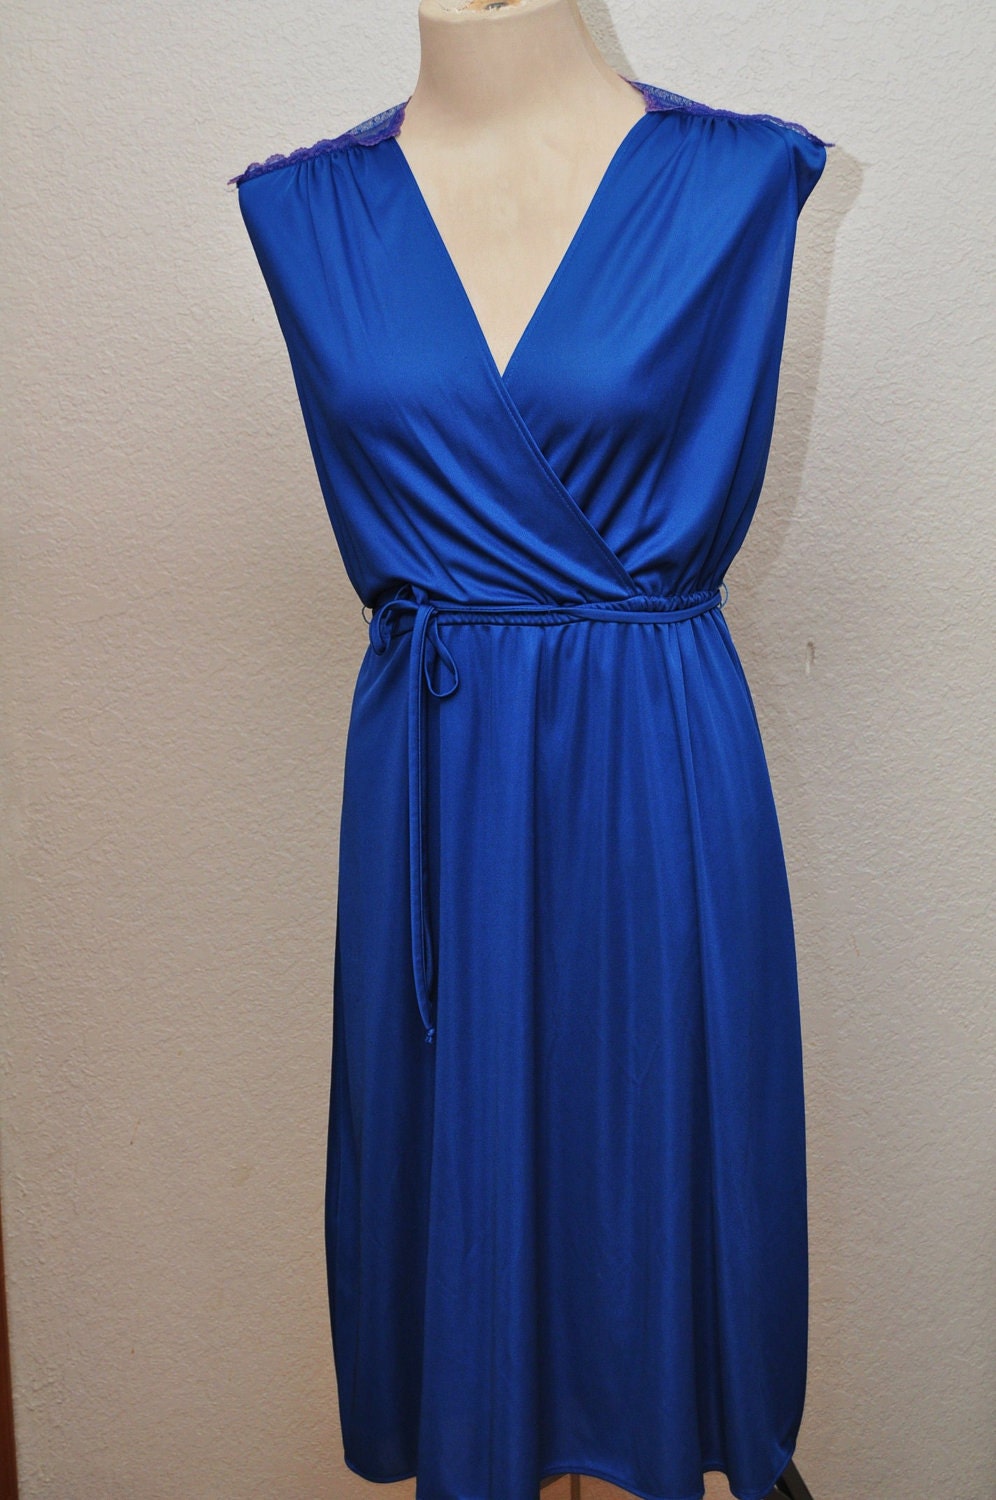 Vintage Ladies Dress in Electric Blue Disco Style Wrap Bodice Lace Back